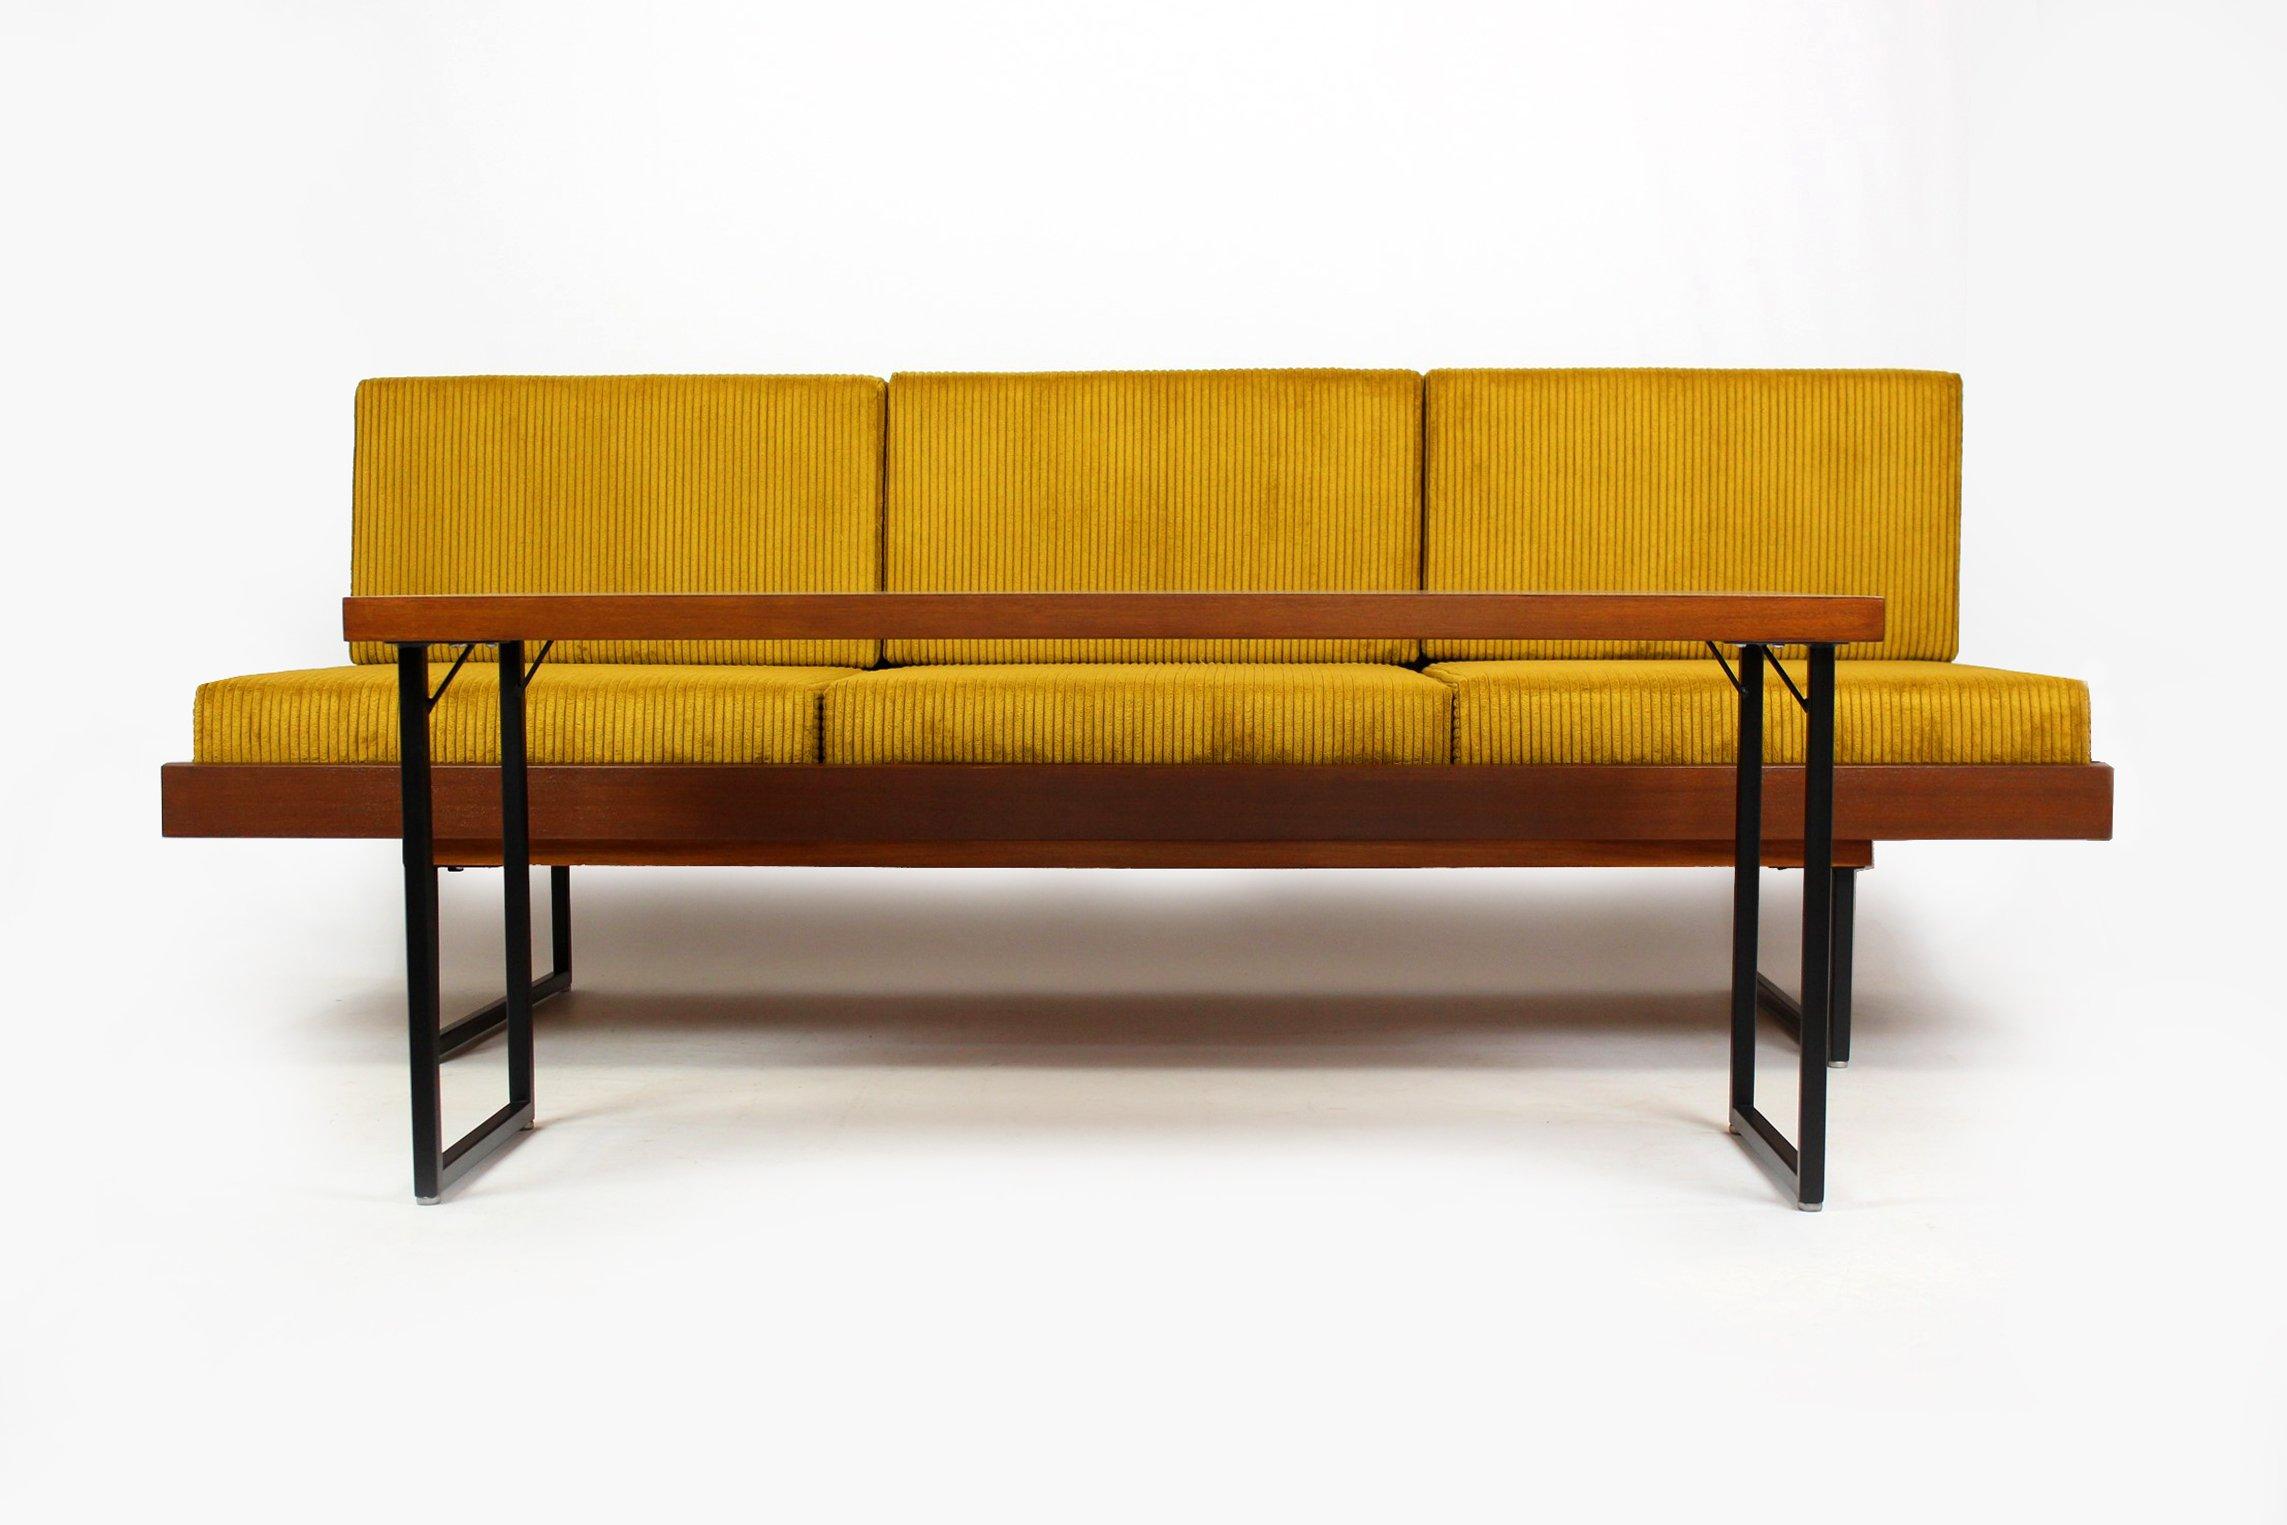 Mid-century sofa daybed with coffee table, manufactured in the 1960s by Interier Praha in Czechoslovakia. Made of mahogany veneered wood, set on metal legs.

The sofa has been restored, lacquered woodwork and metal elements, brand new pillows